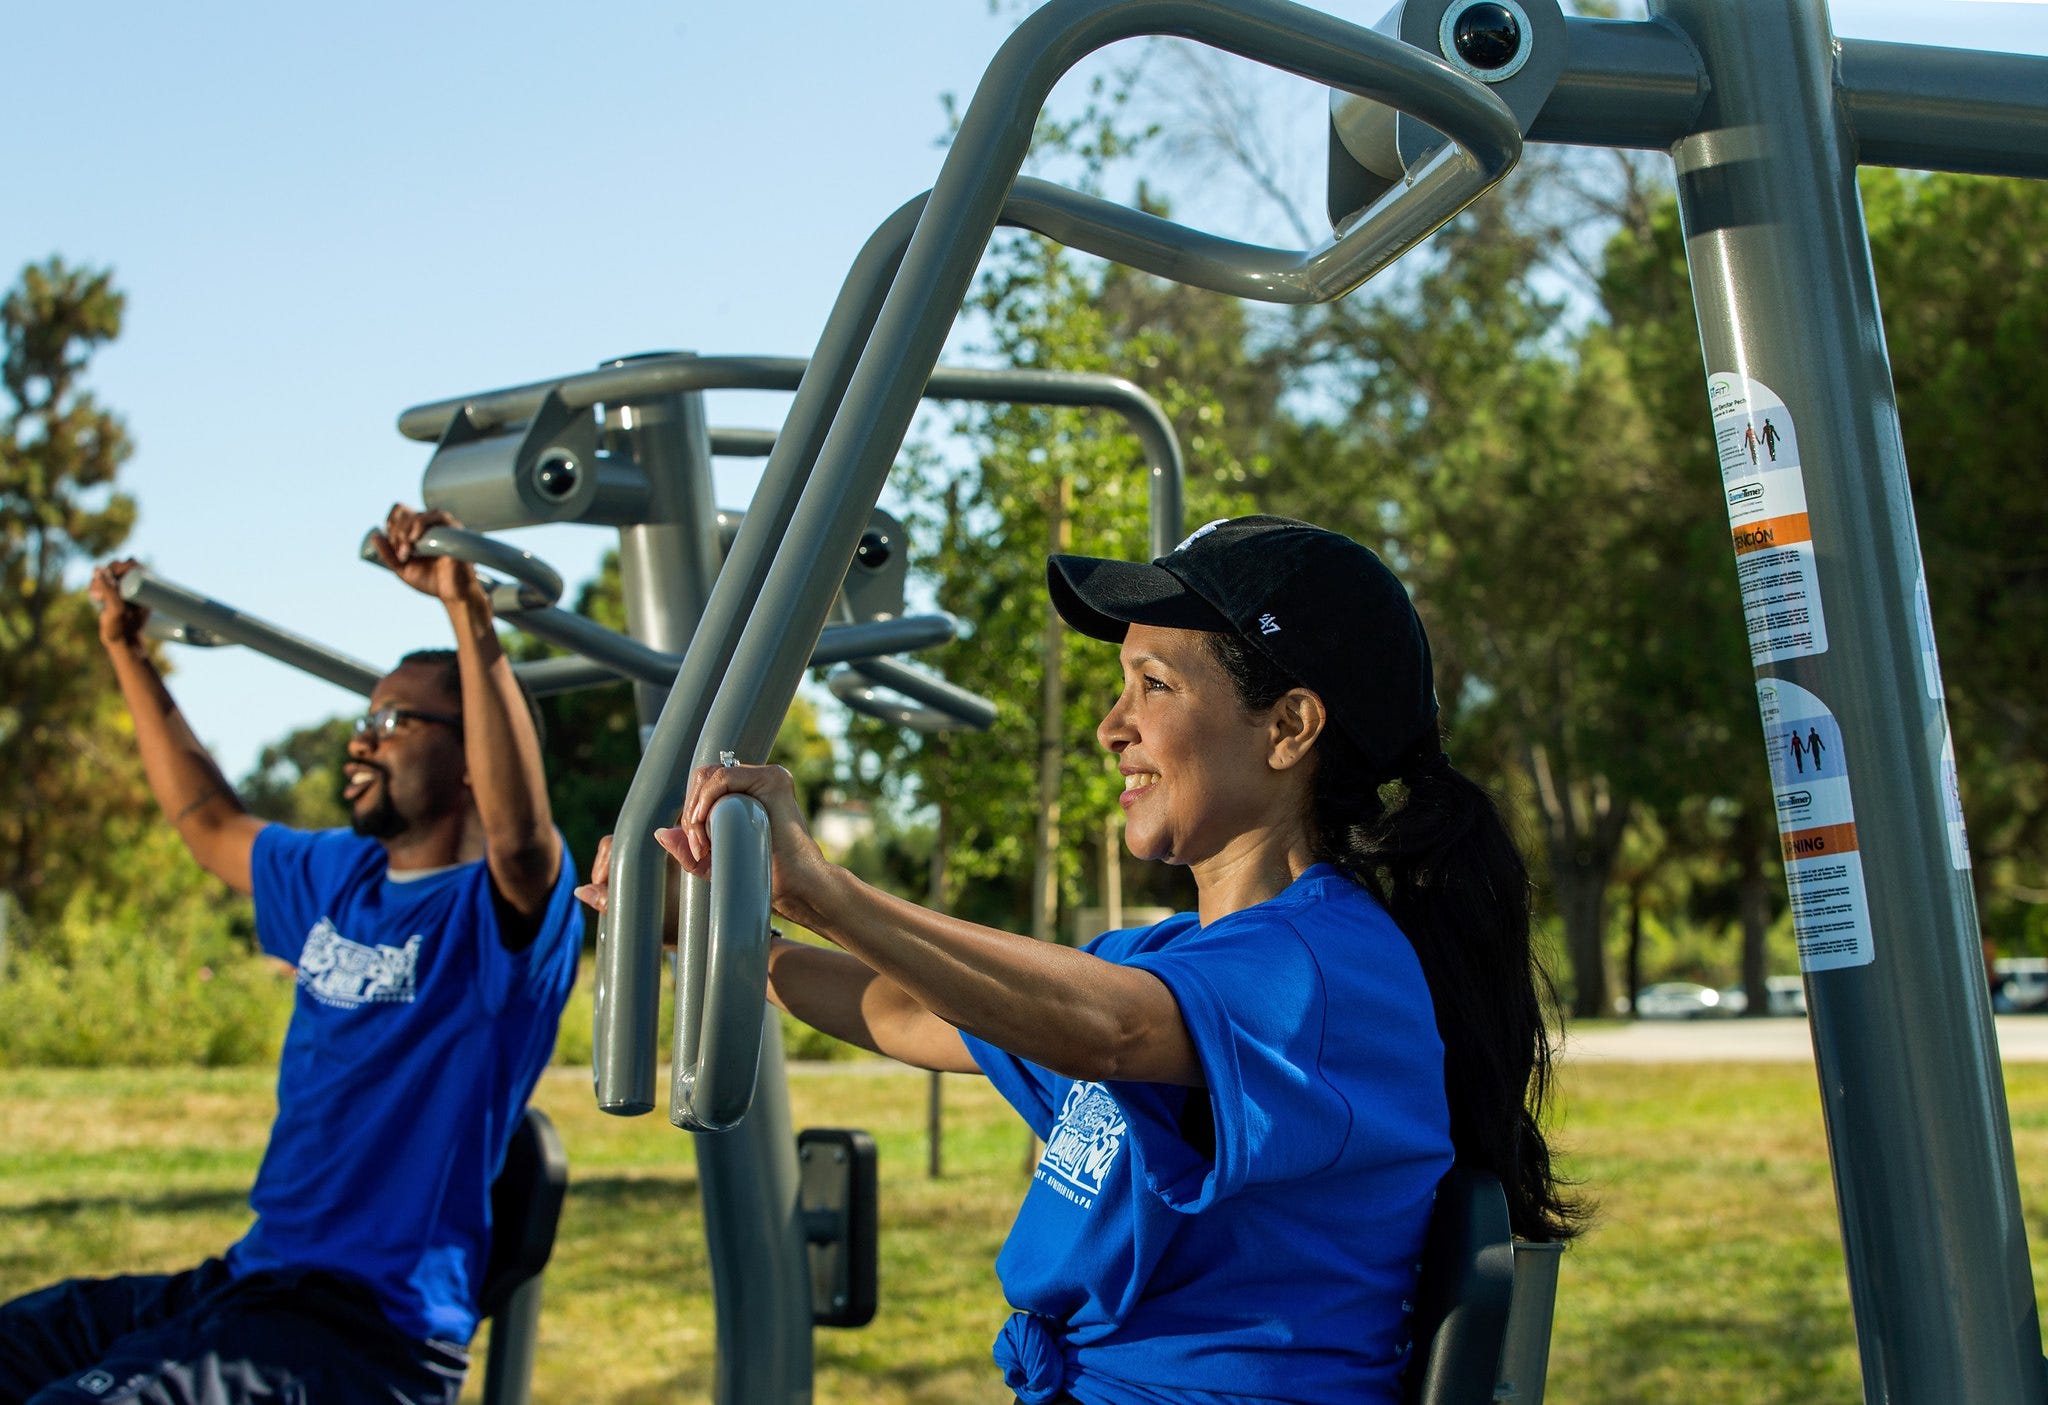 People using outdoor fitness equipment in a park